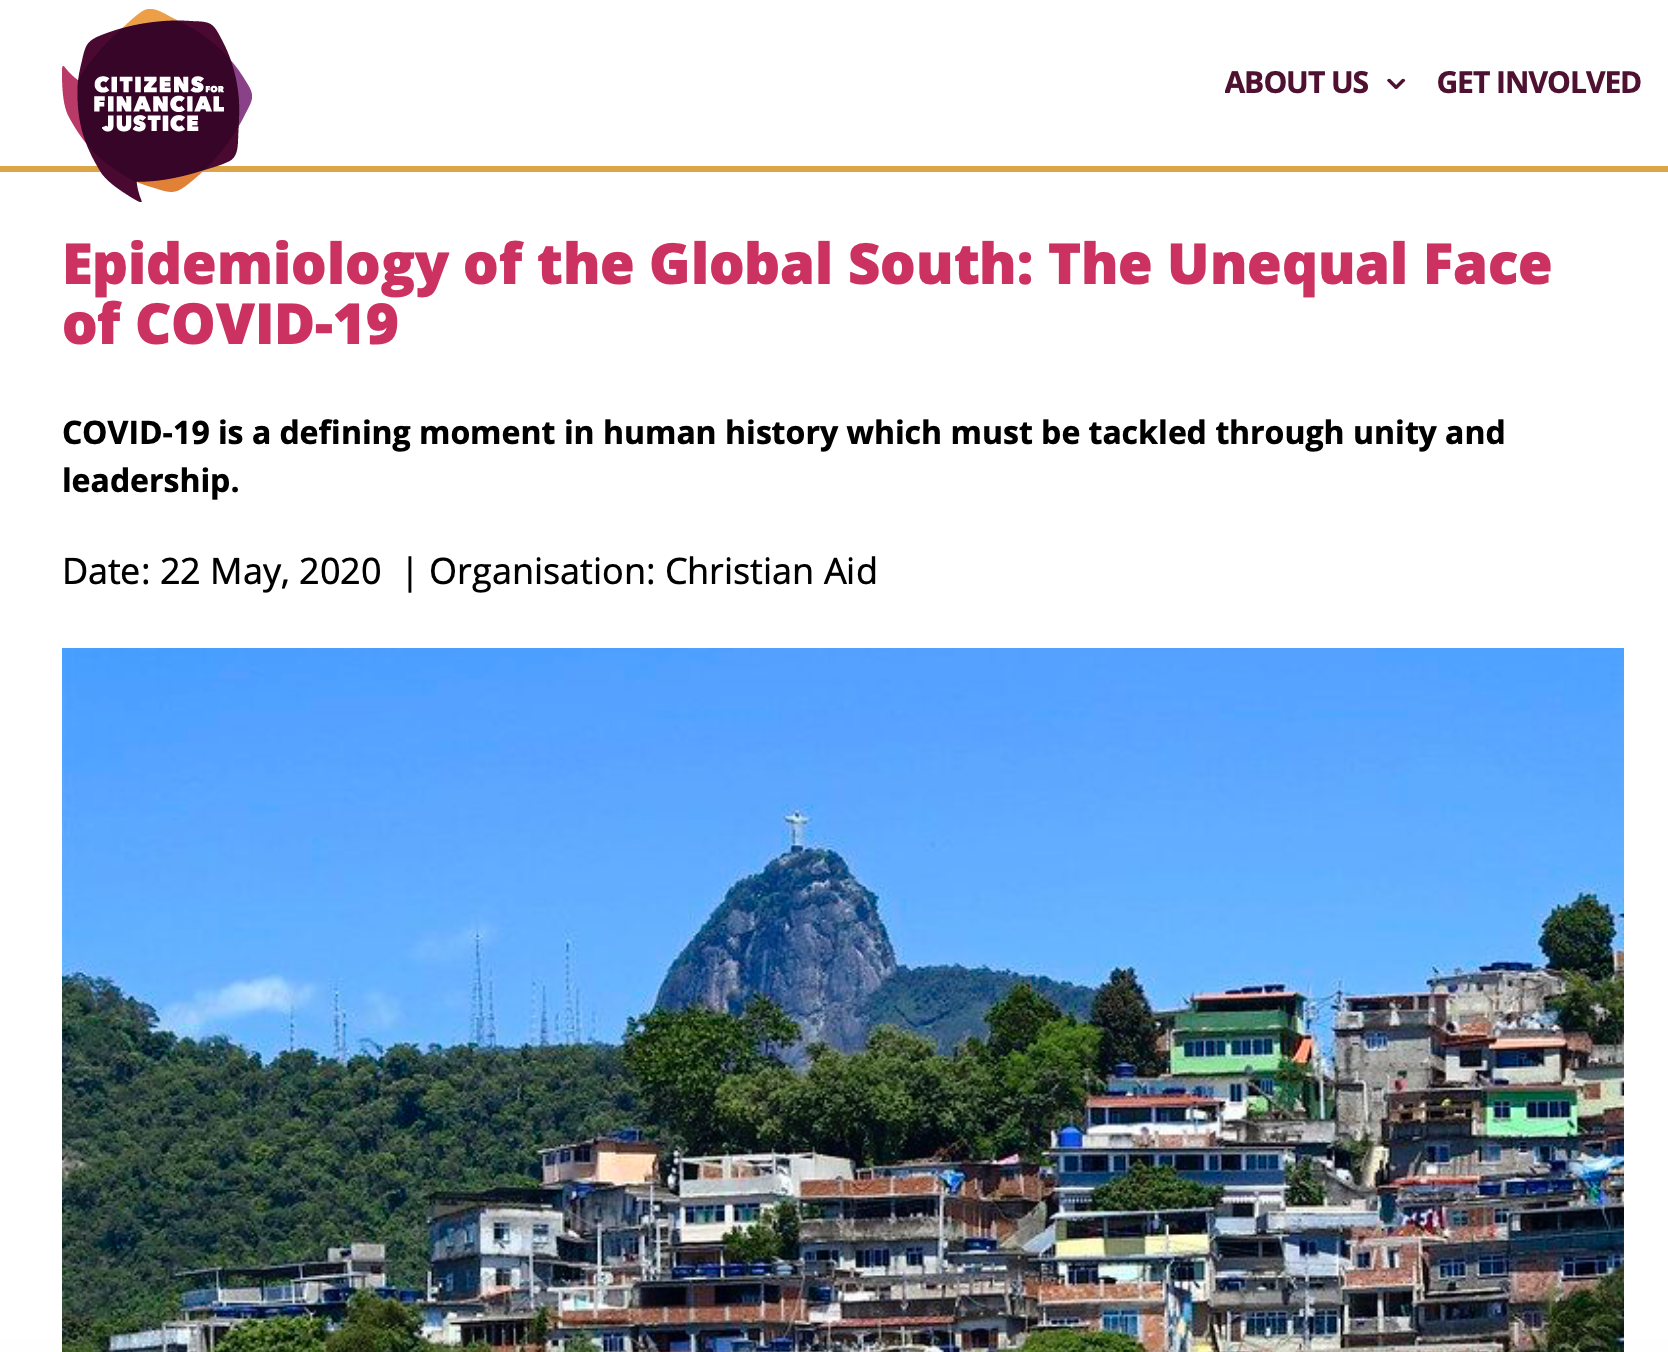 Epidemiology of the global south: the unequal face of COVID-19